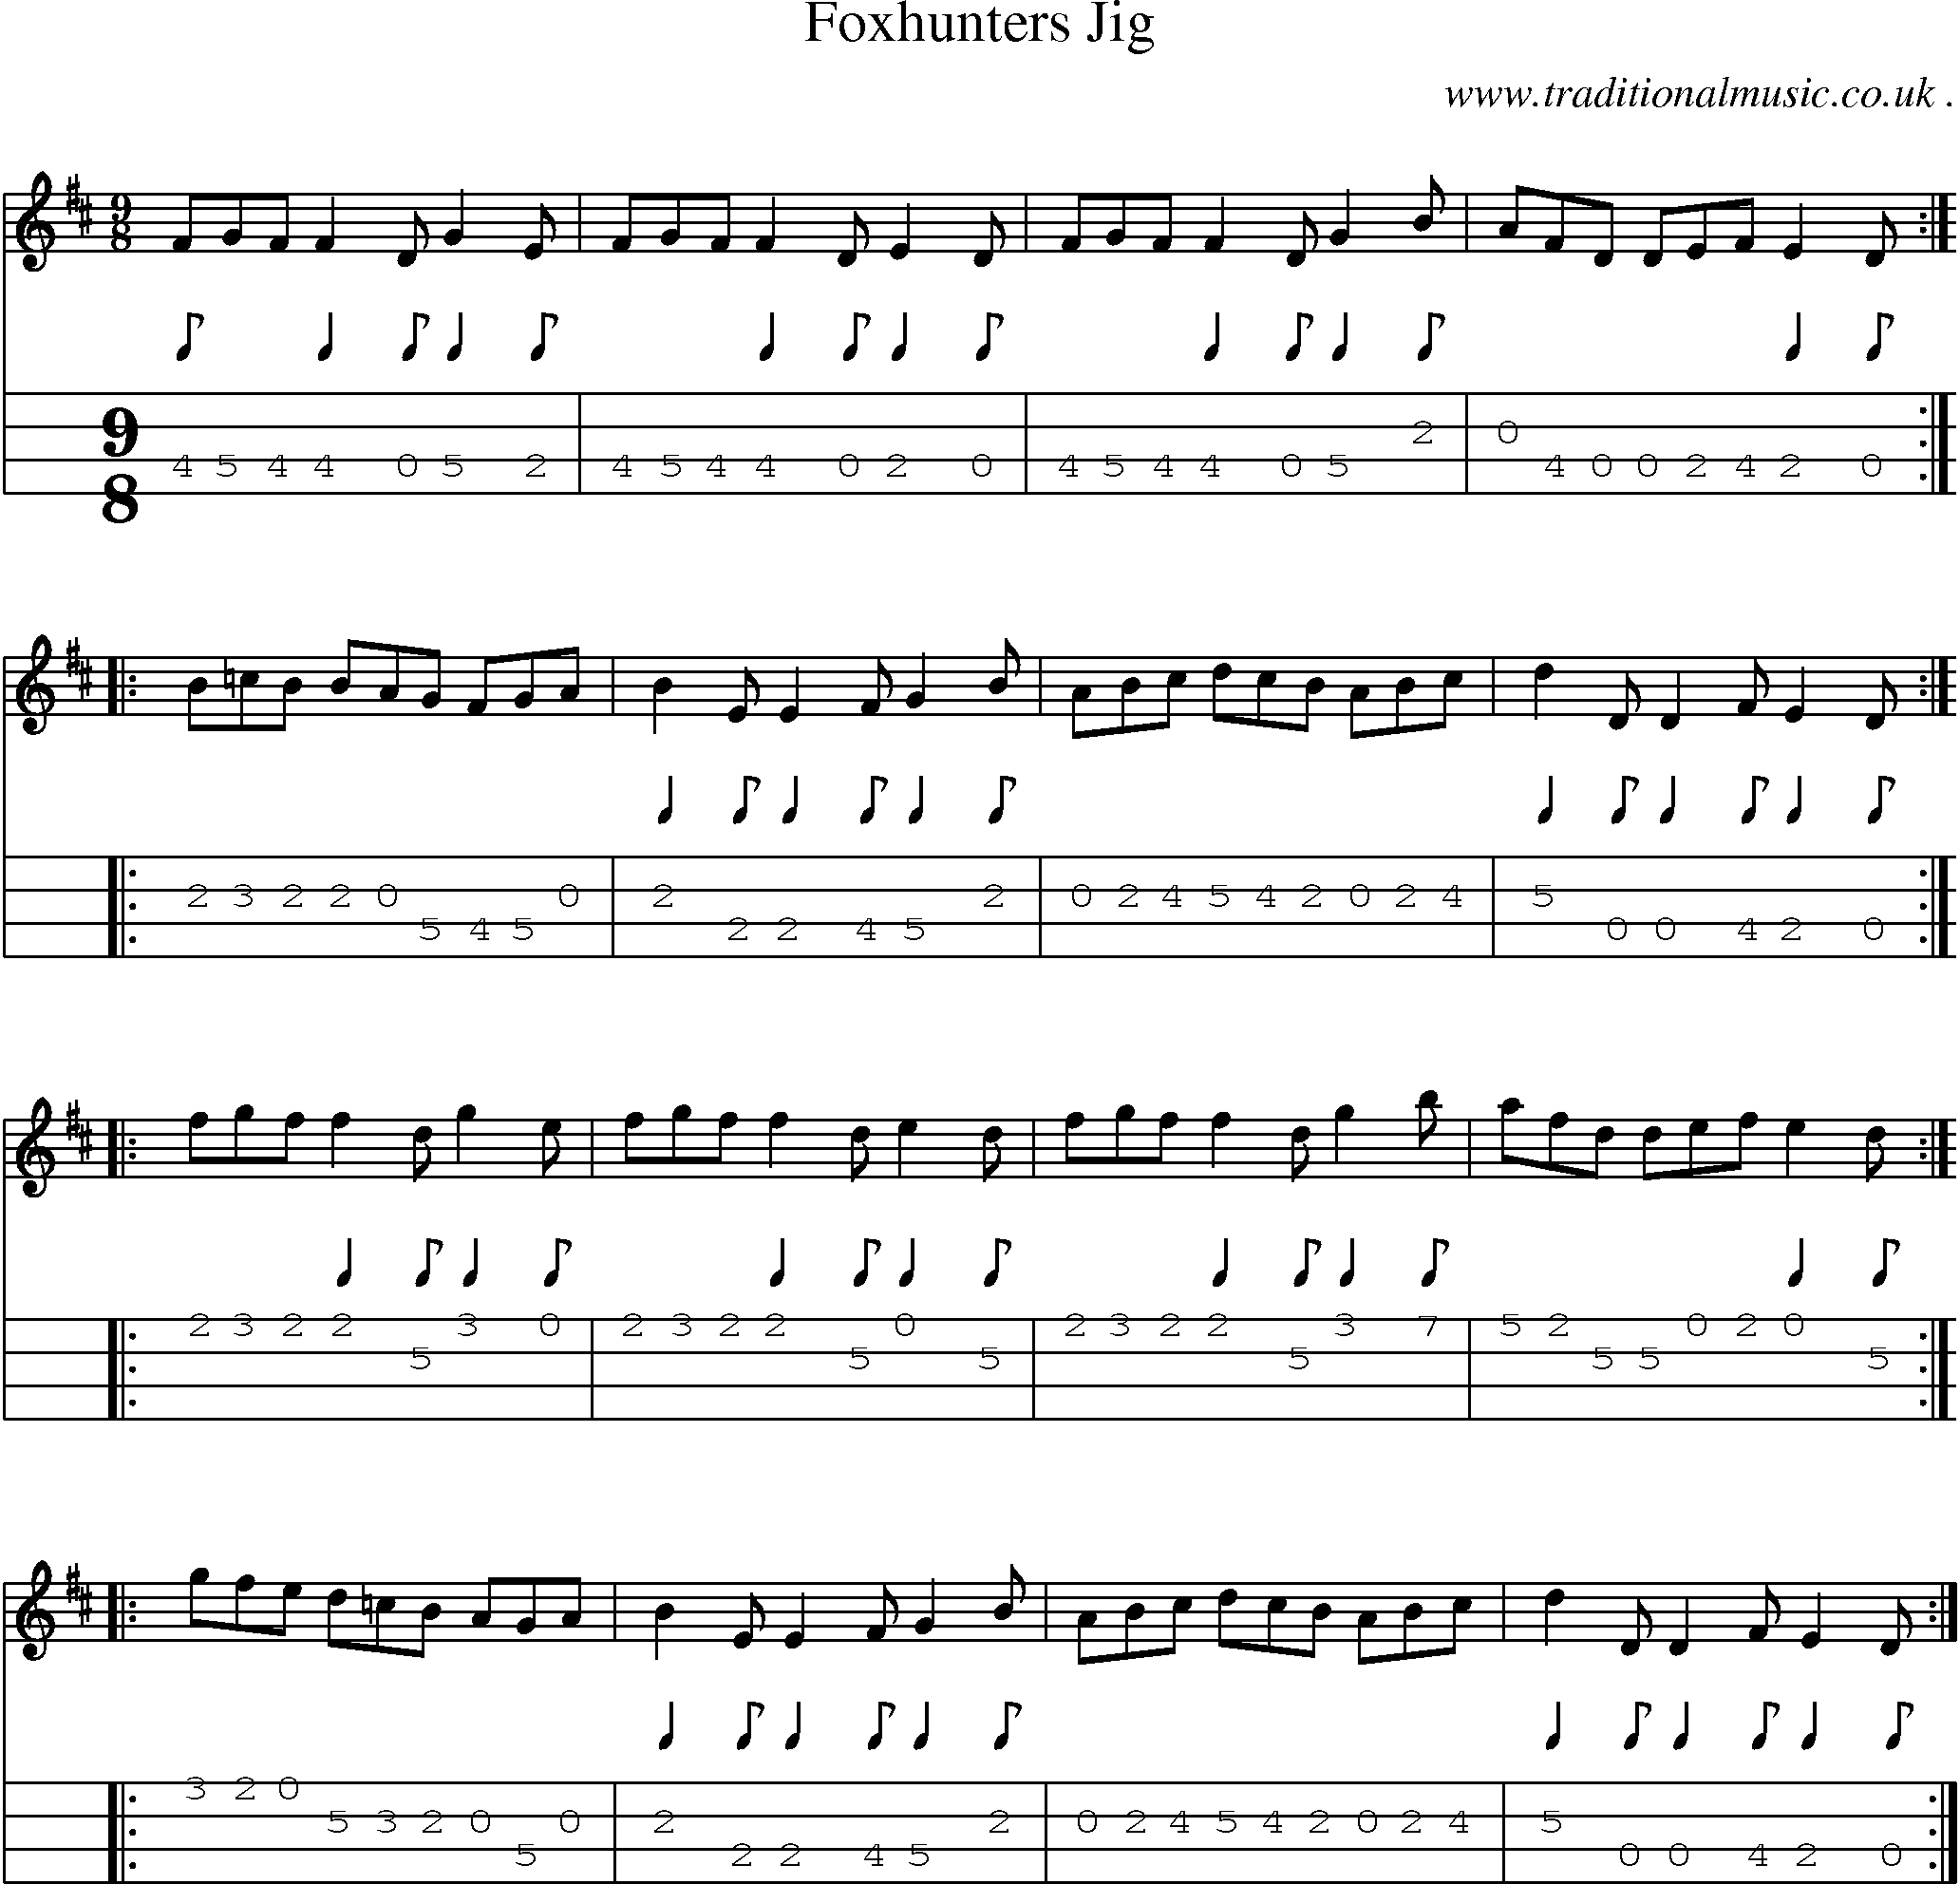 Sheet-Music and Mandolin Tabs for Foxhunters Jig